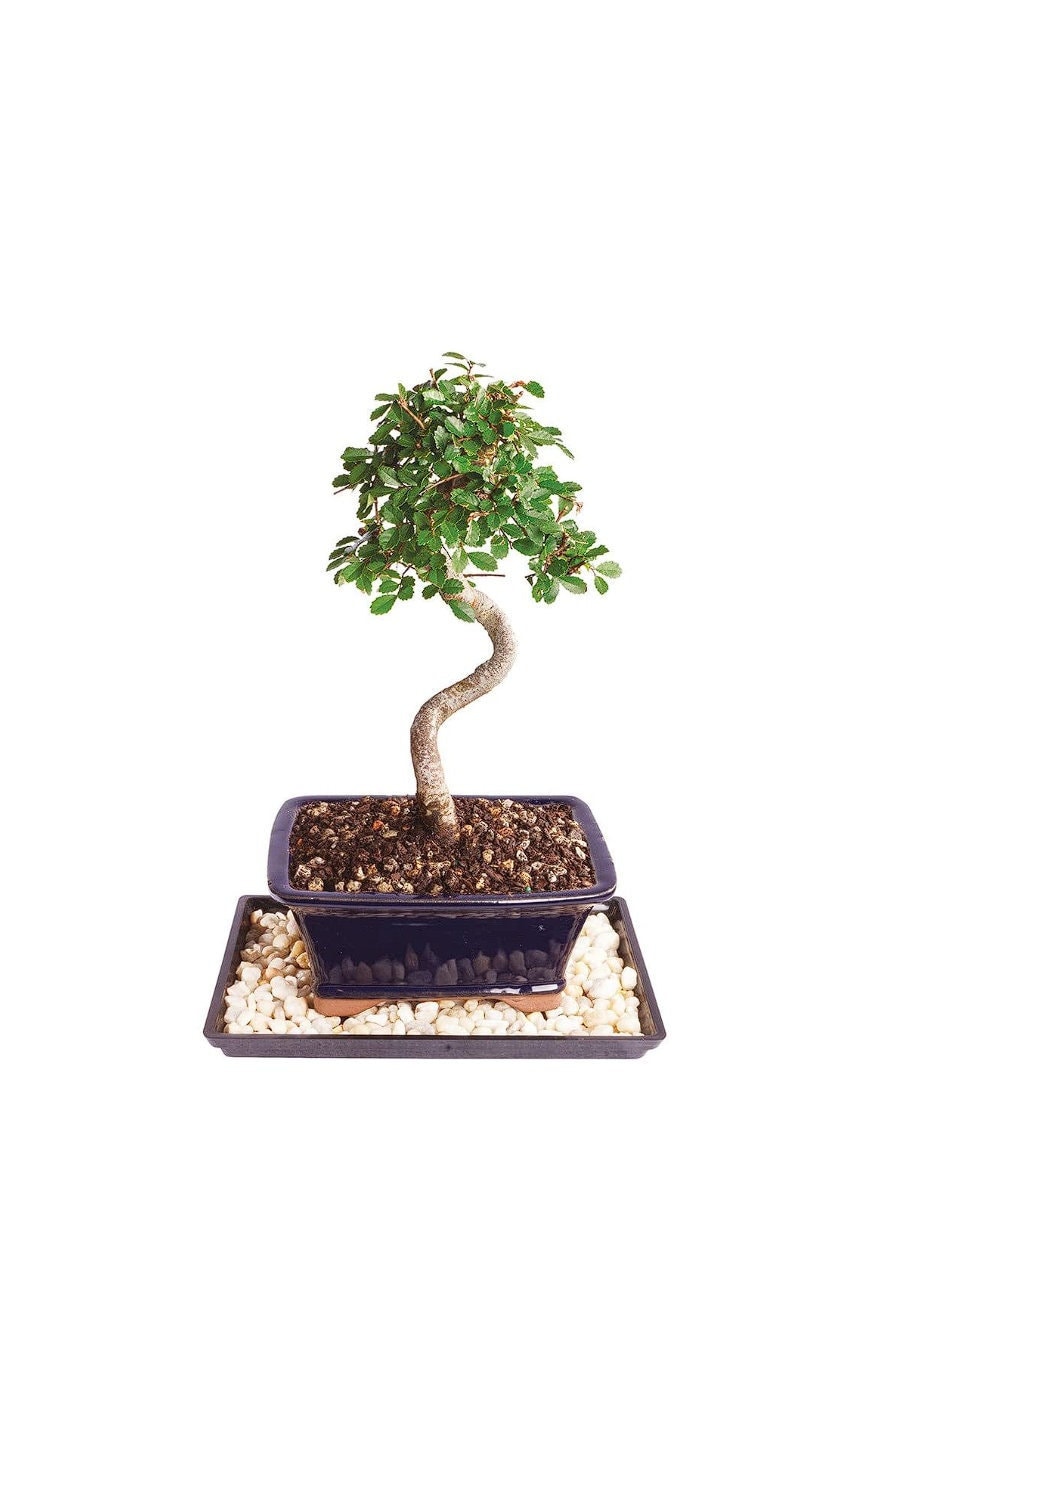 Artificial : Alluring Curved Sideways Bonsai buy online plants and trees at  pixies Gardens.